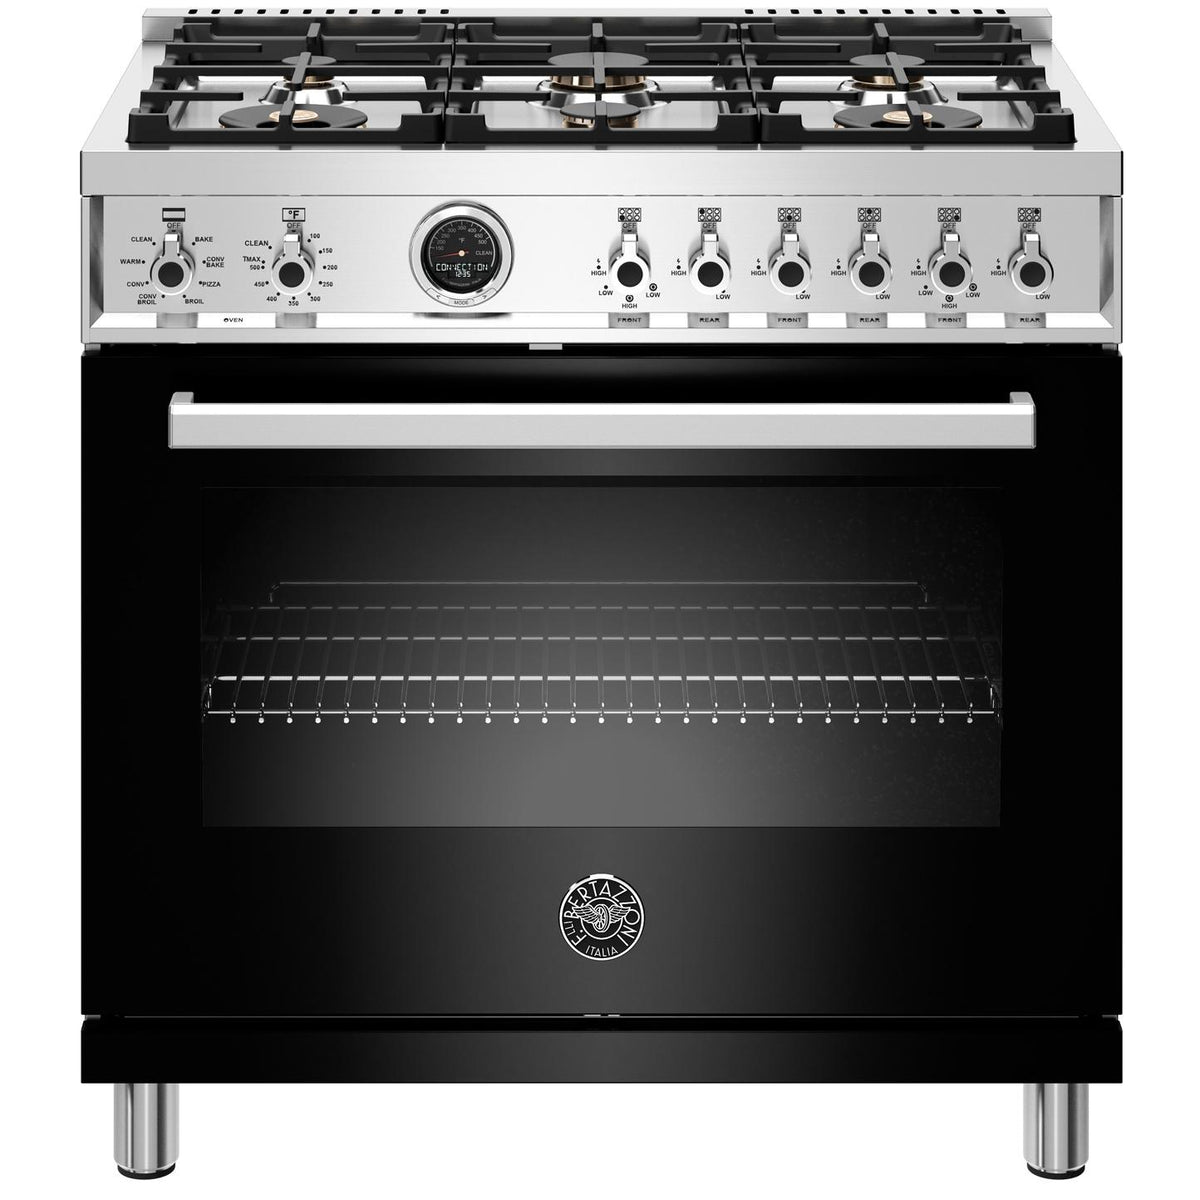 36-inch Freestanding Dual-Fuel Range with Convection PROF366DFSNET IMAGE 1